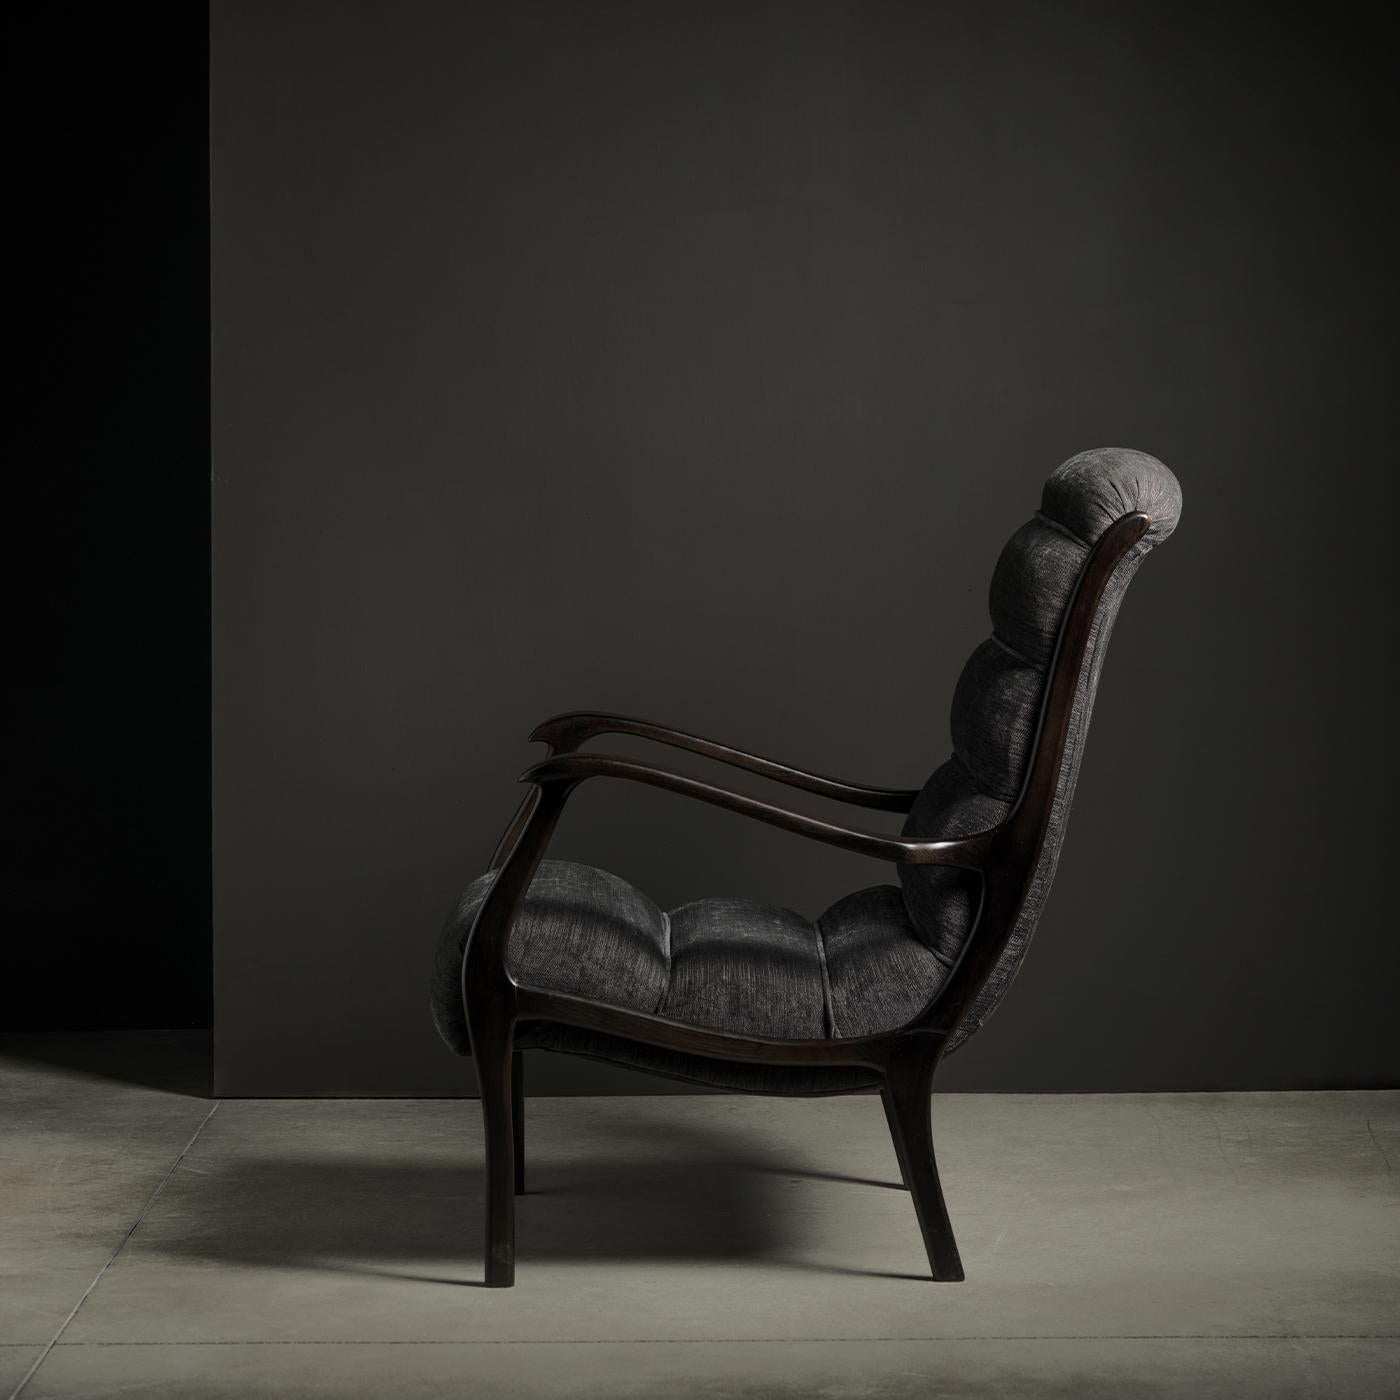 This armchair features a vintage-style silhouette that is made modern and up-to-date through the use of a brown, mixed cotton covering that features horizontal topstitching for a padded look. Its structure is made from wood with a dark walnut finish